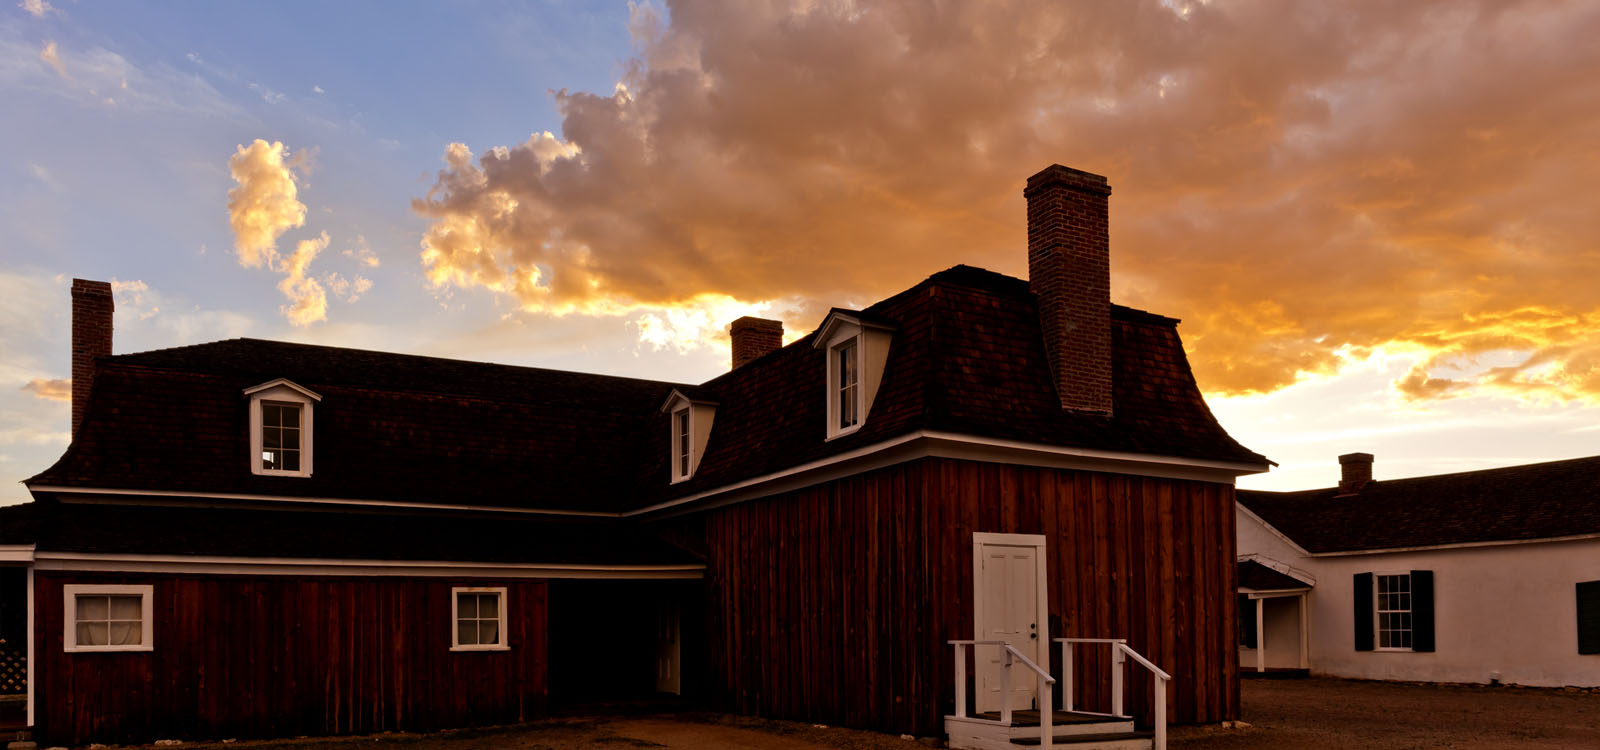 The sun sets behind one of the main buildings at Fort Verde State Historic Park